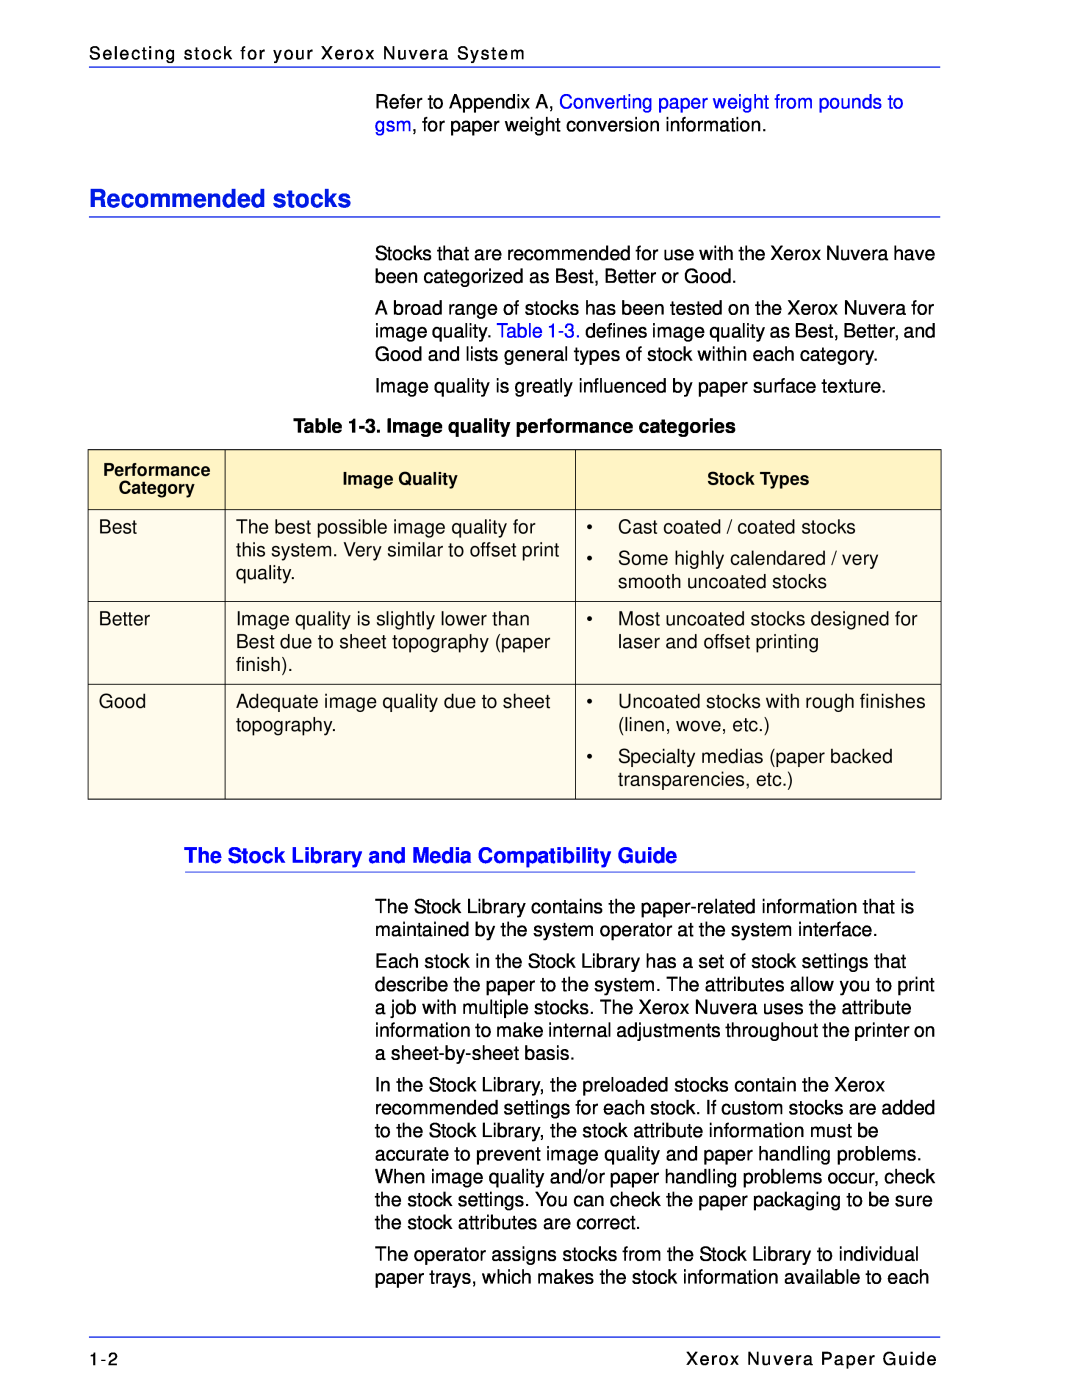 Xerox 701P28020 manual Recommended stocks, The Stock Library and Media Compatibility Guide 